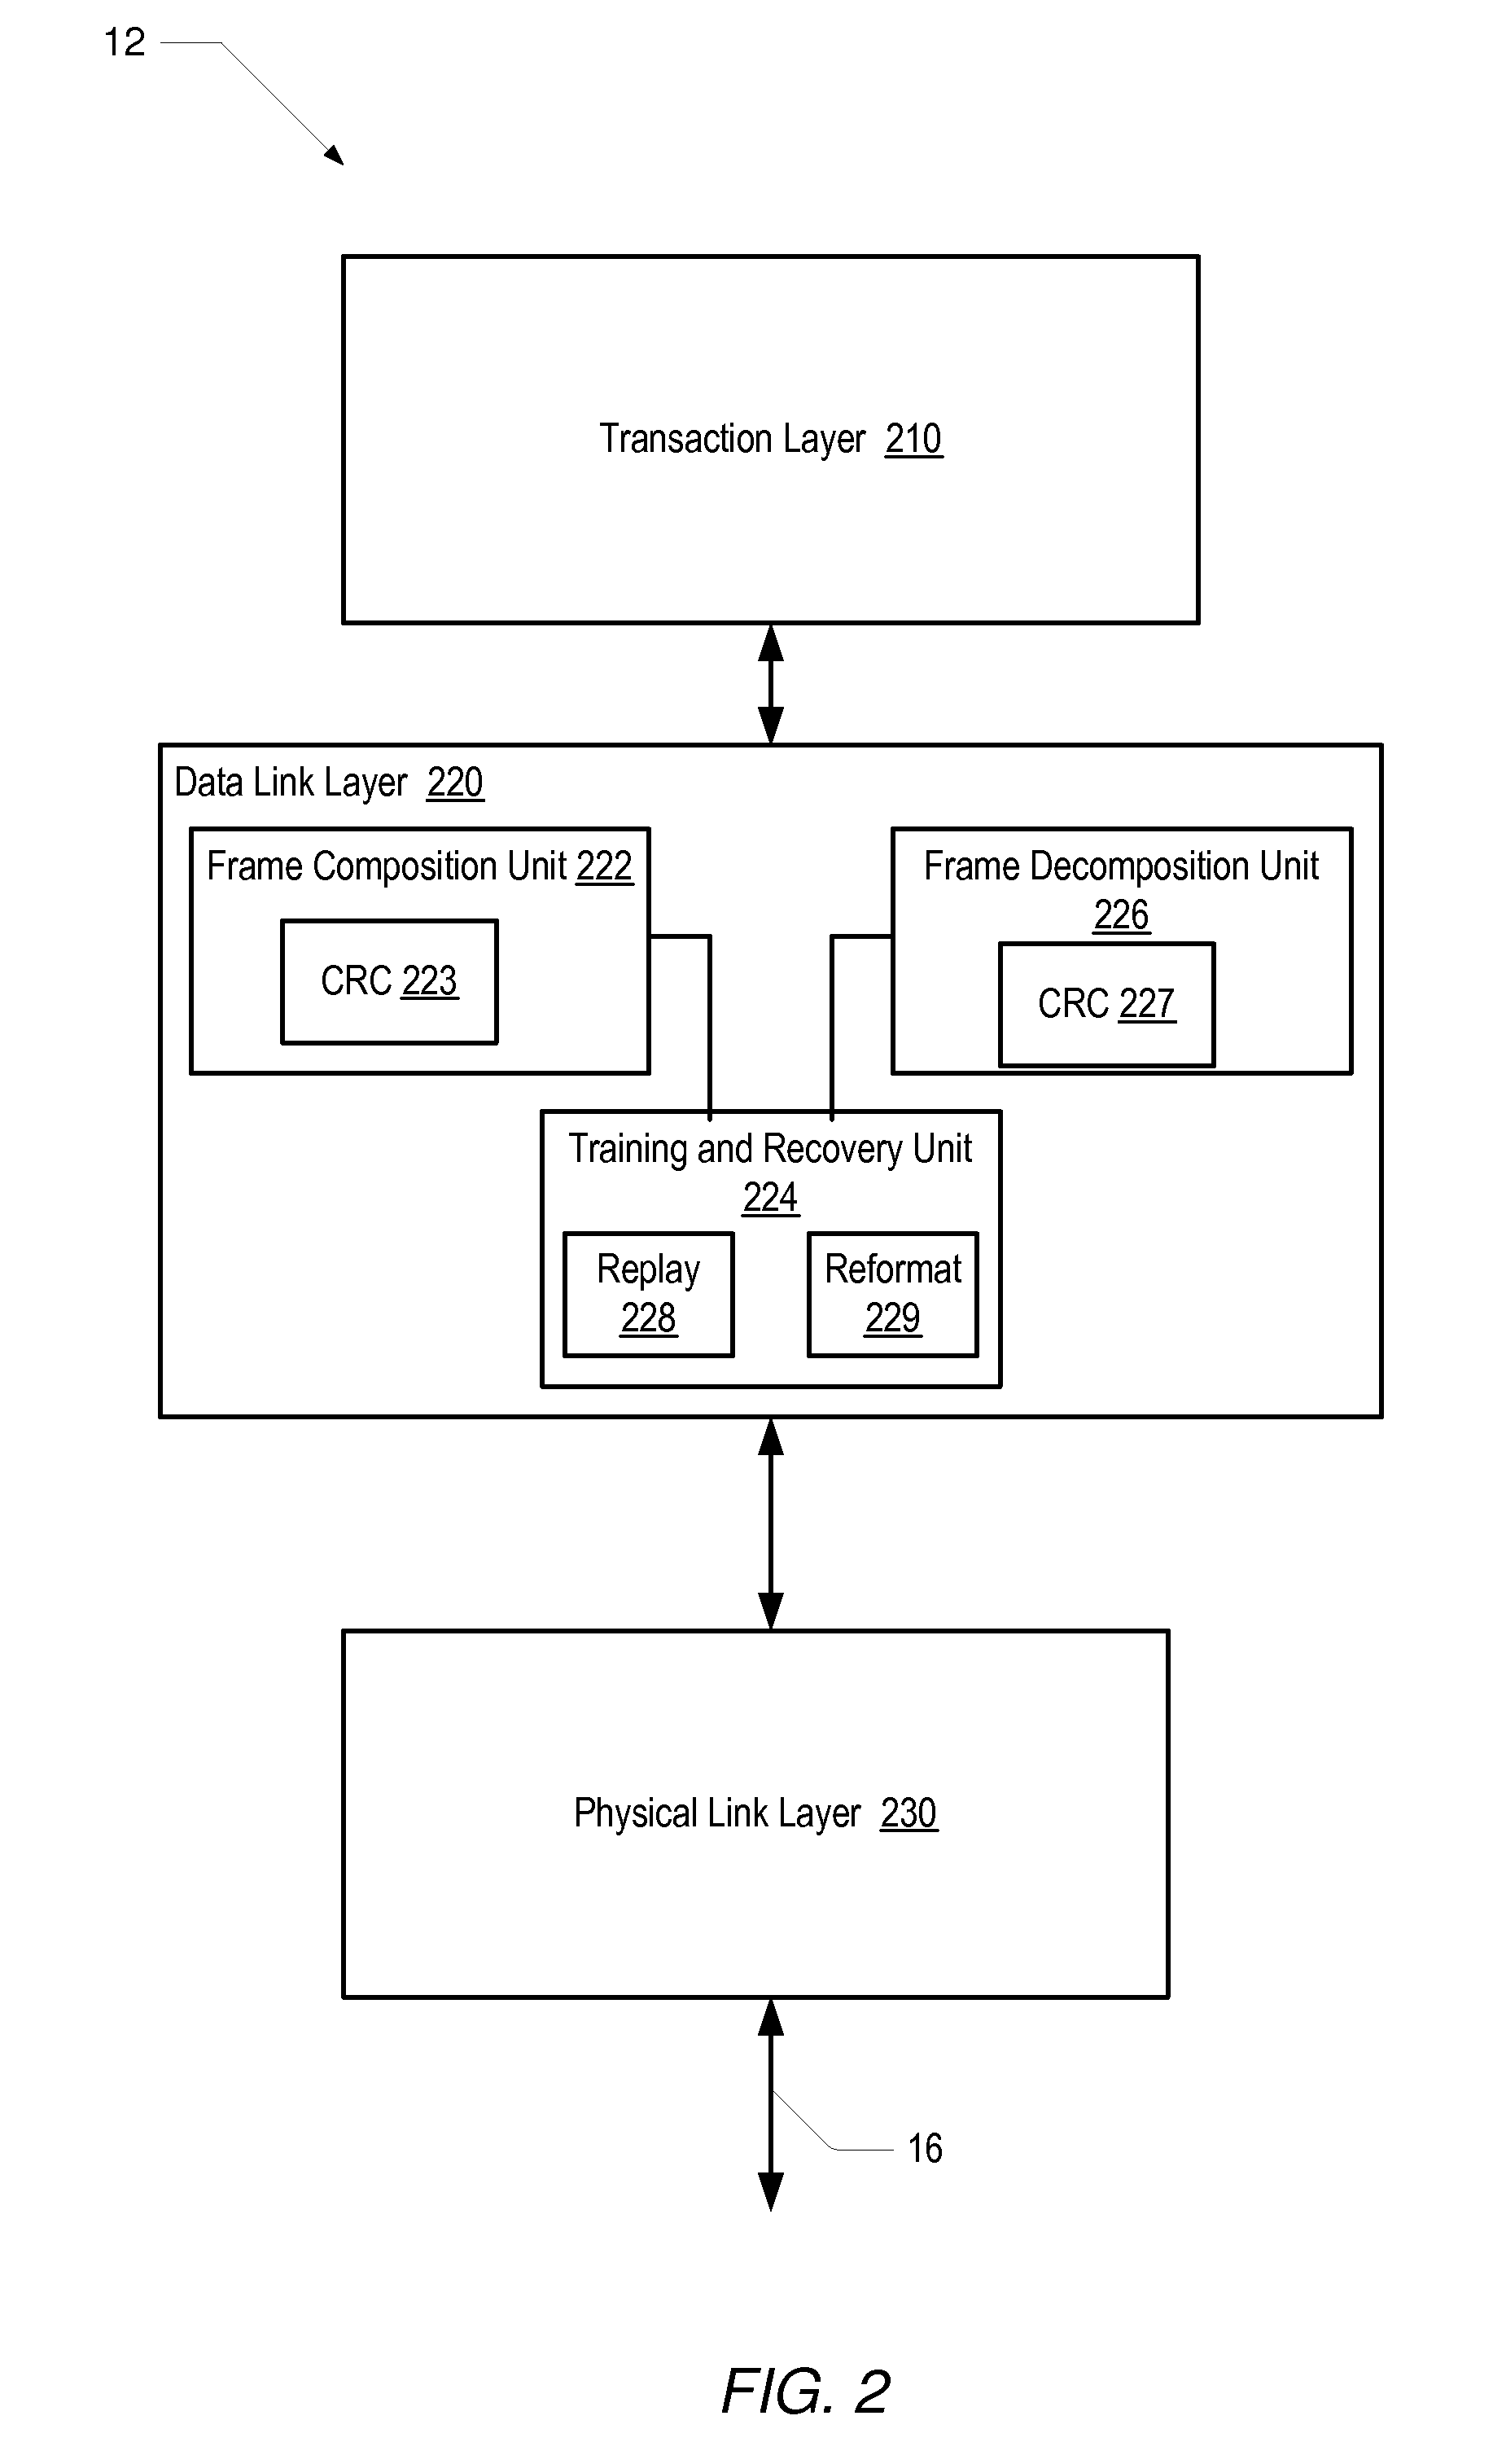 System and method for automatic communication lane failover in a serial link